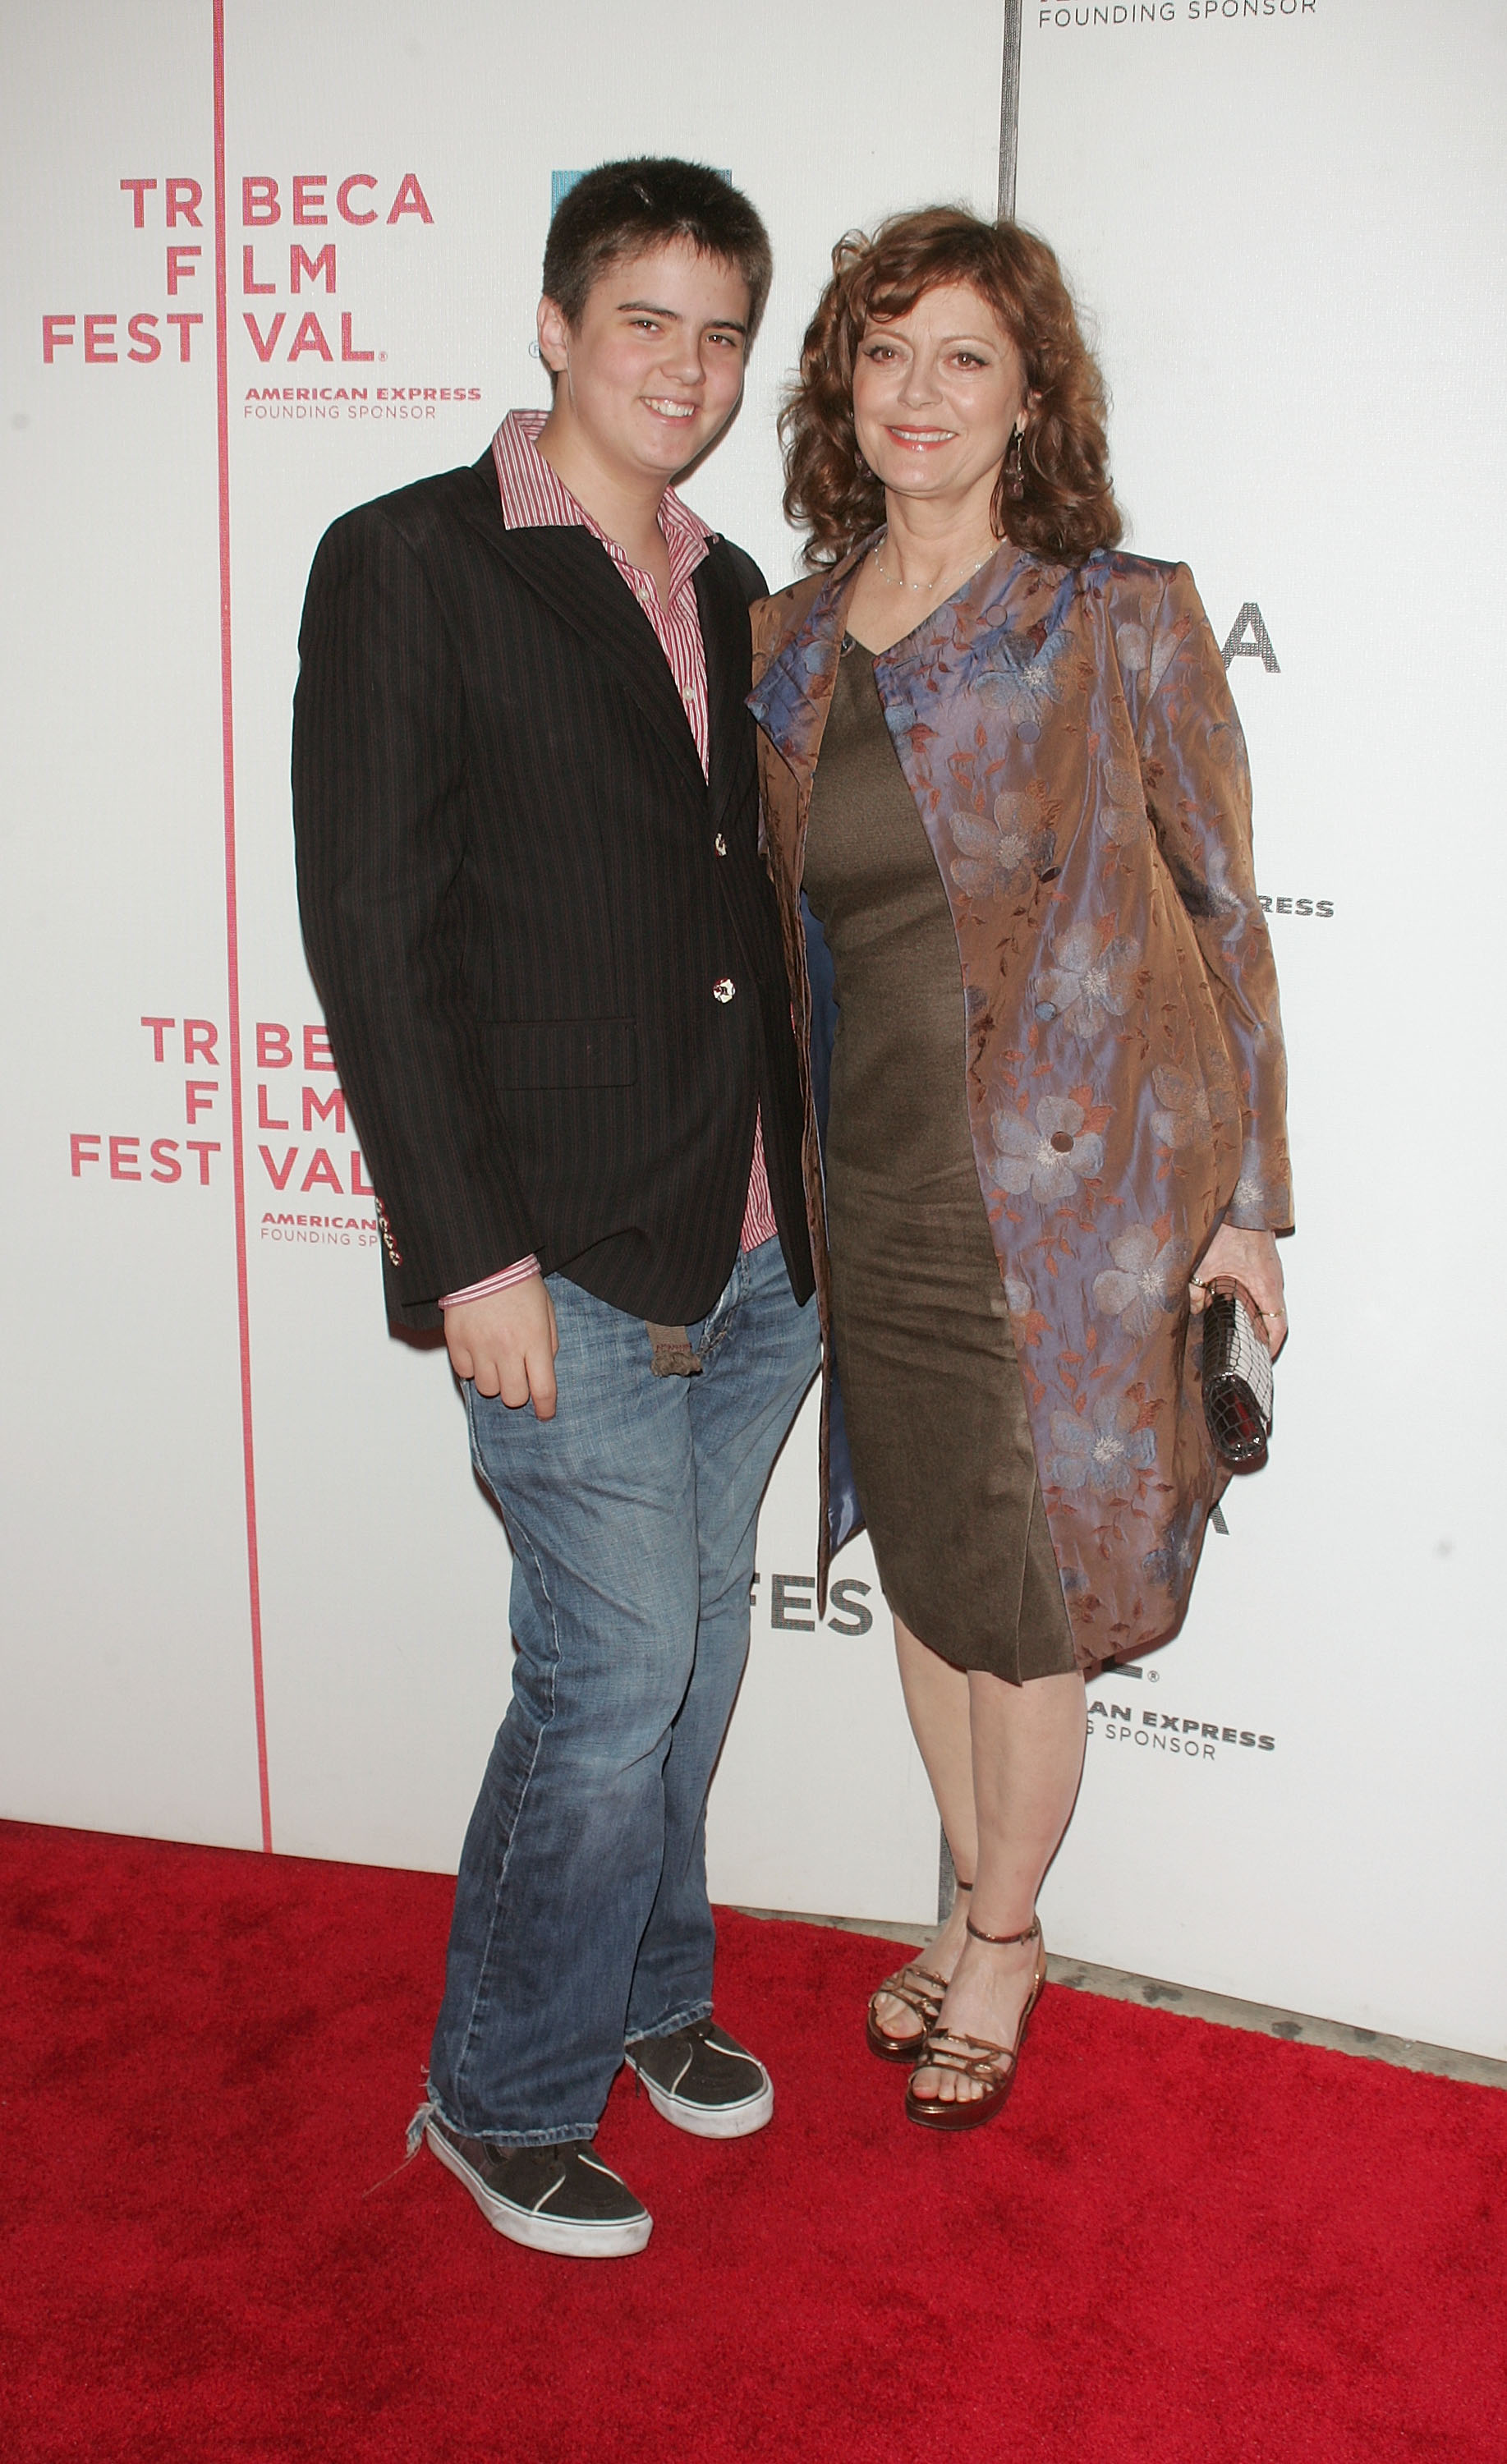 Miles Robbins and Susan Sarandon at the 7th Annual Tribeca Film Festival "Speed Racer" premiere at BMCC/TPAC in New York City on May 3, 2008 | Source: Getty Images